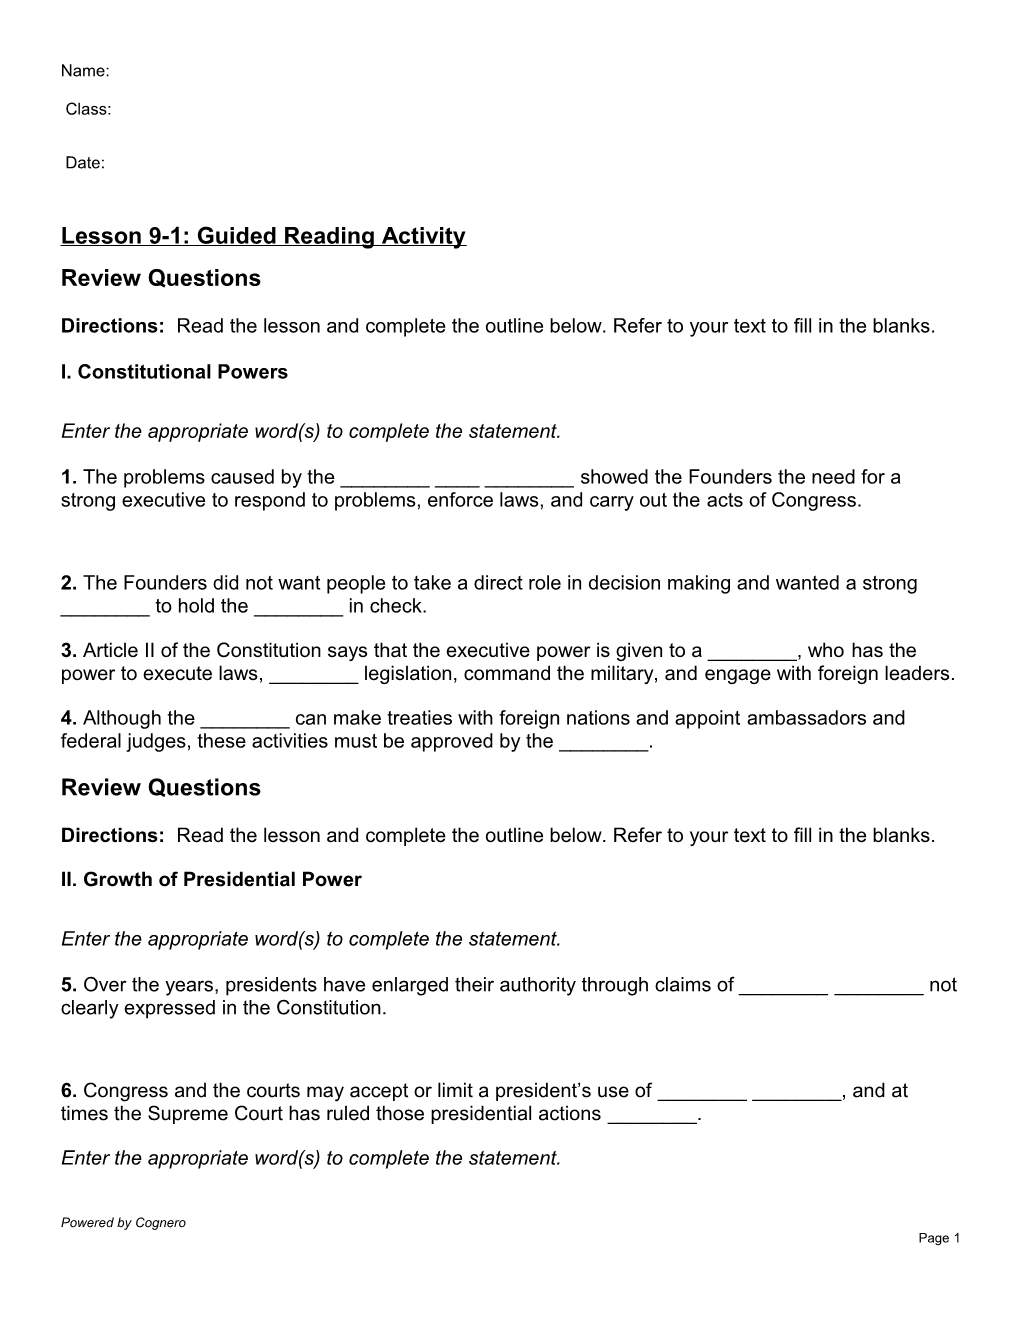 Lesson 9-1: Guided Reading Activity